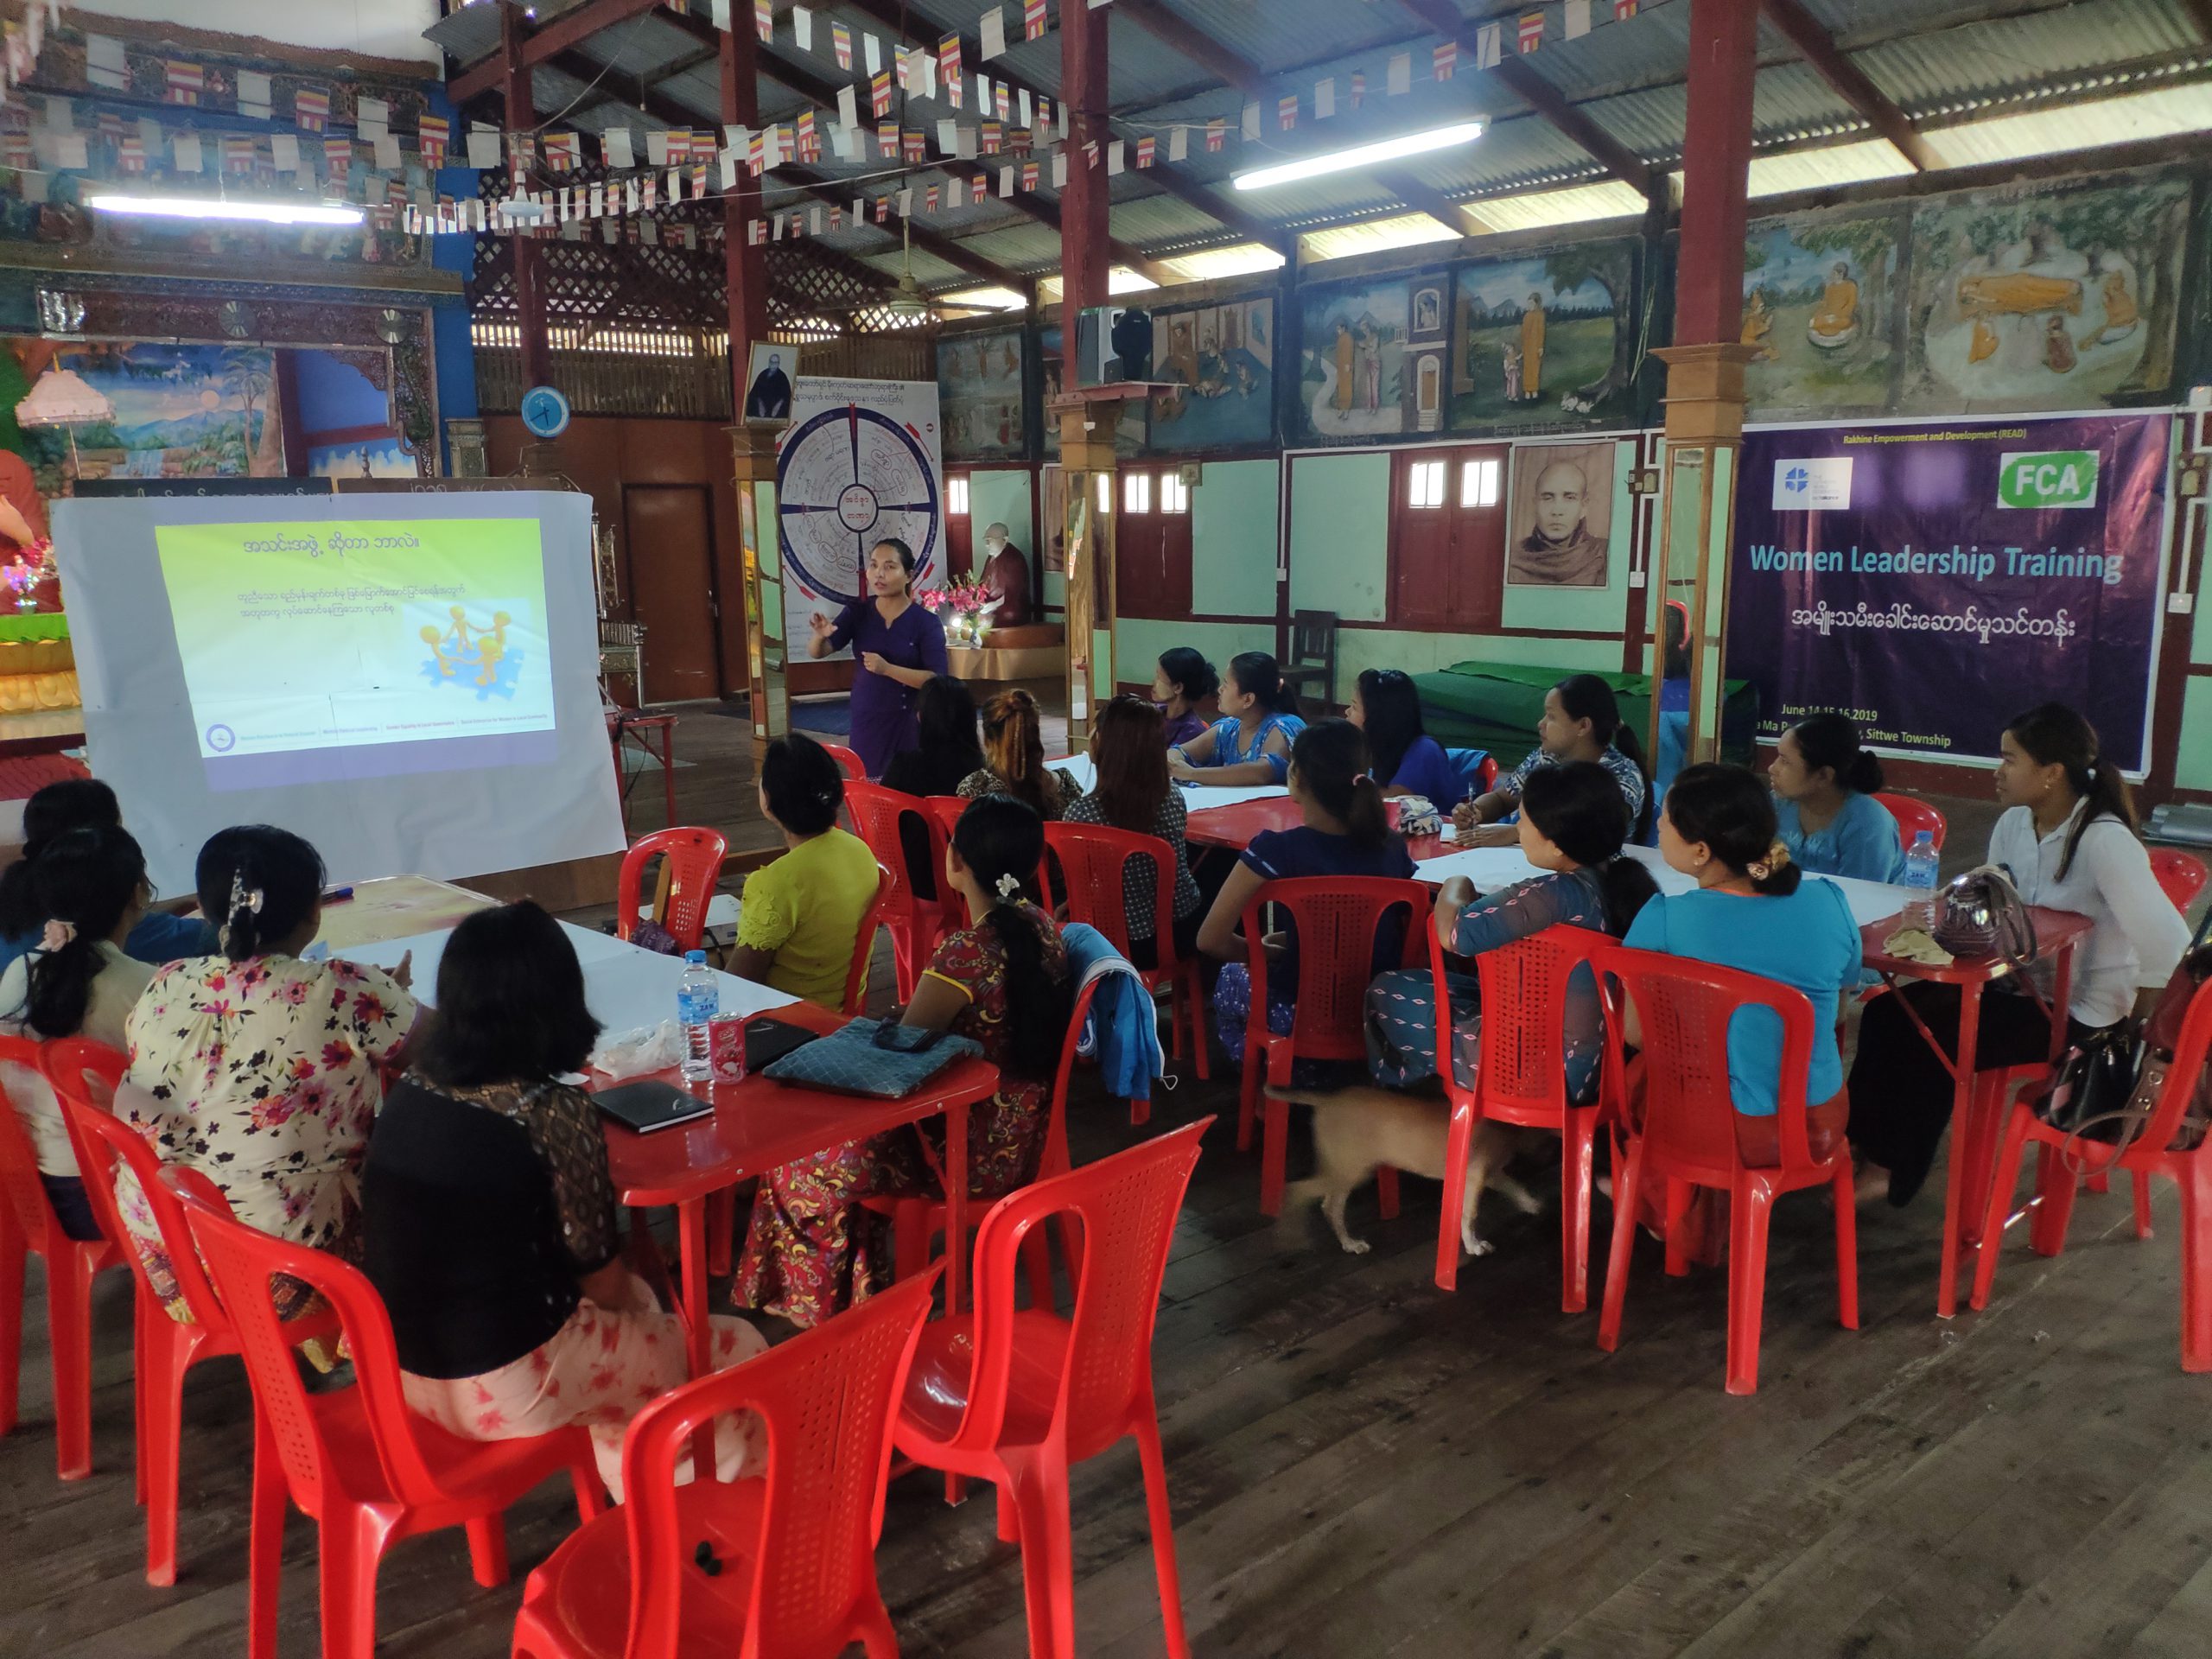 YCT provides women’s leadership training to the targeted beneficiaries of Lutheran World Federation (LWF)